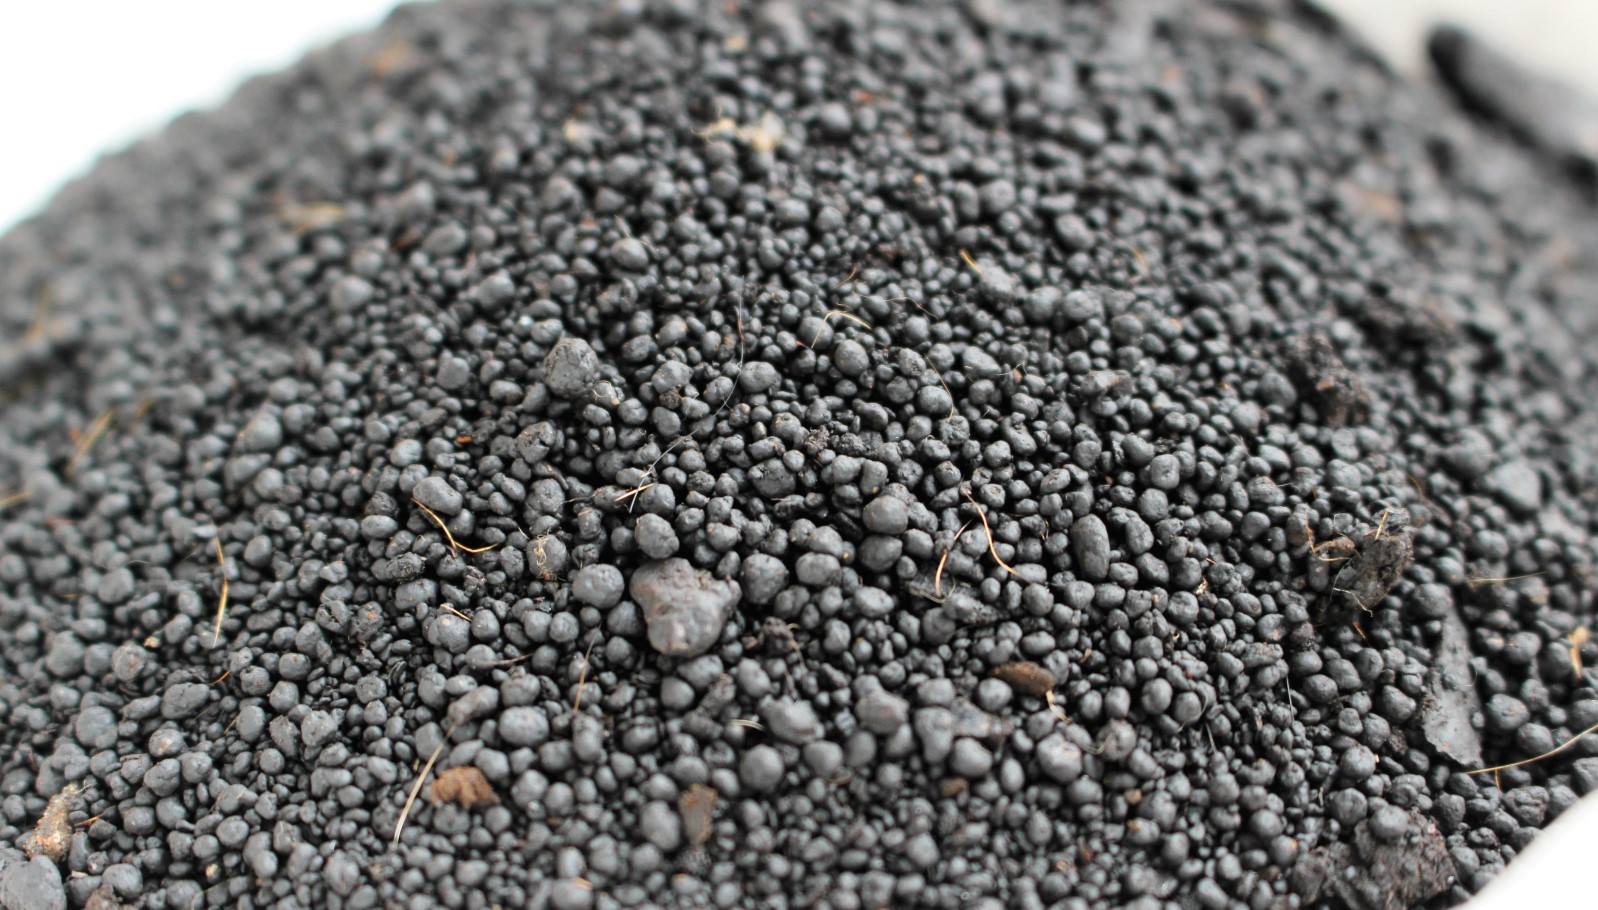 Odorless, sterile fertilizer transformed from solid waste. Photo courtesy of Epic CleanTec